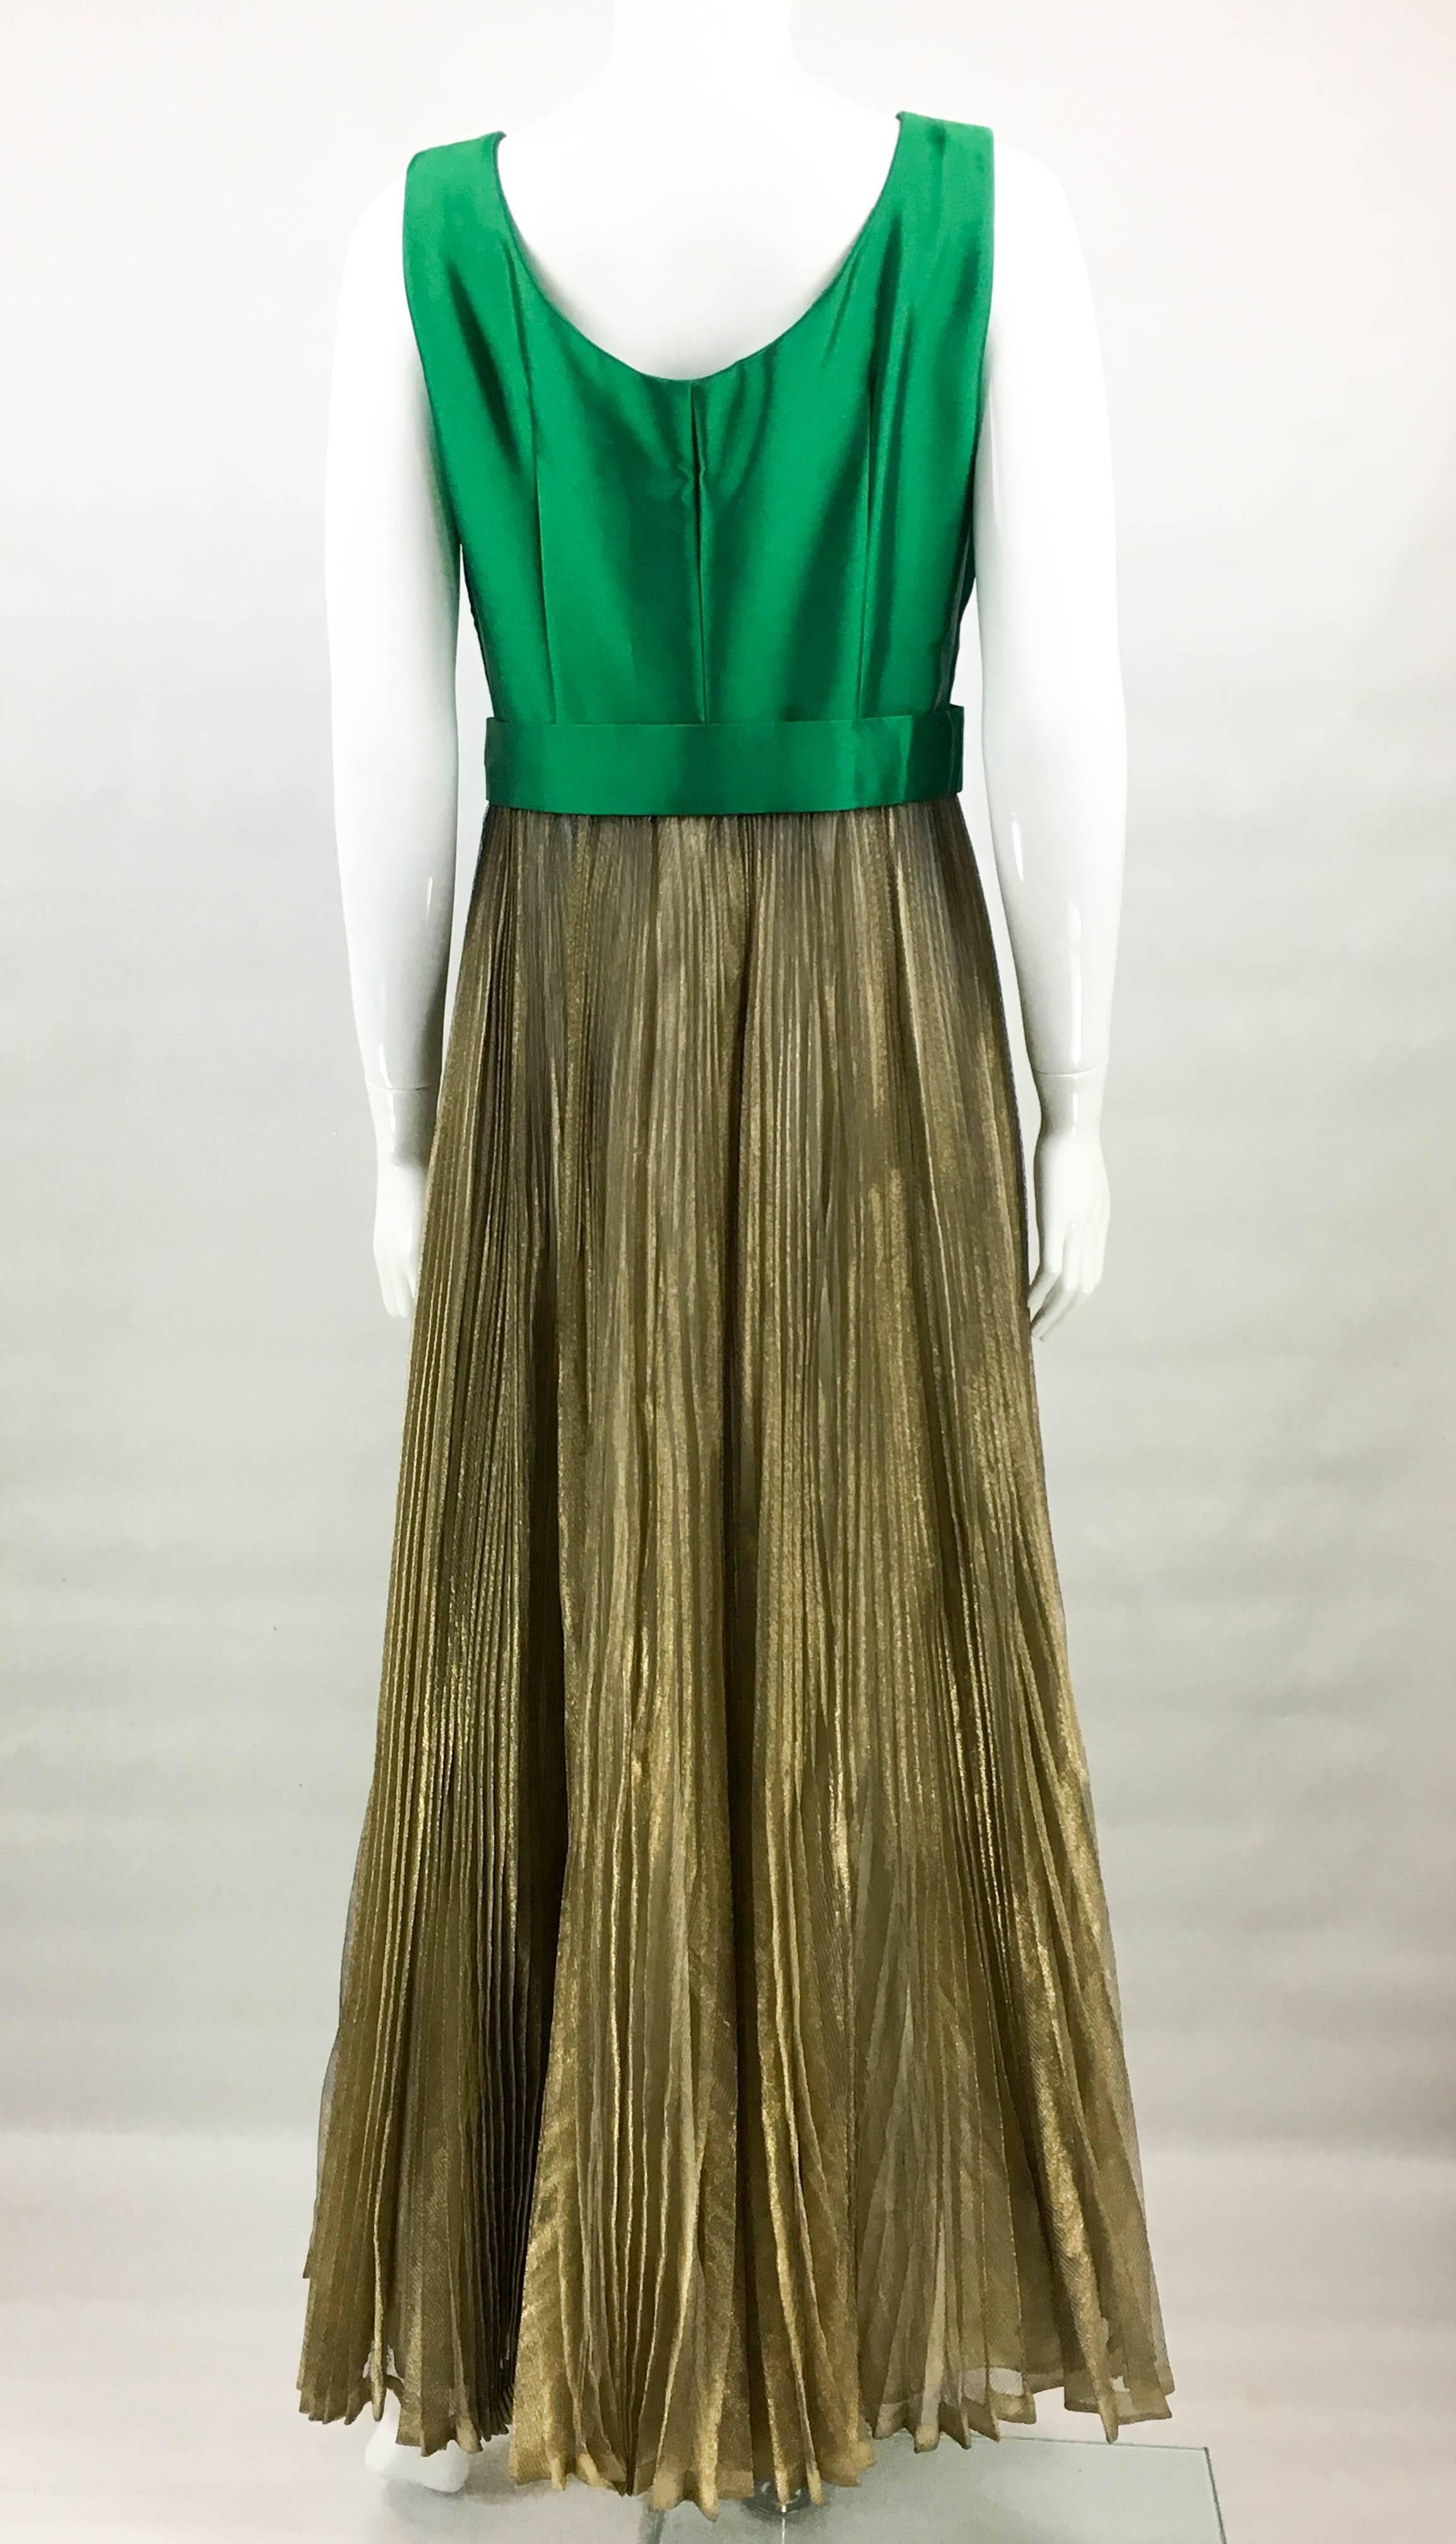 Lanvin Haute Couture Green Gazar and Gold Lame Pleated Gown, early 1960s For Sale 2